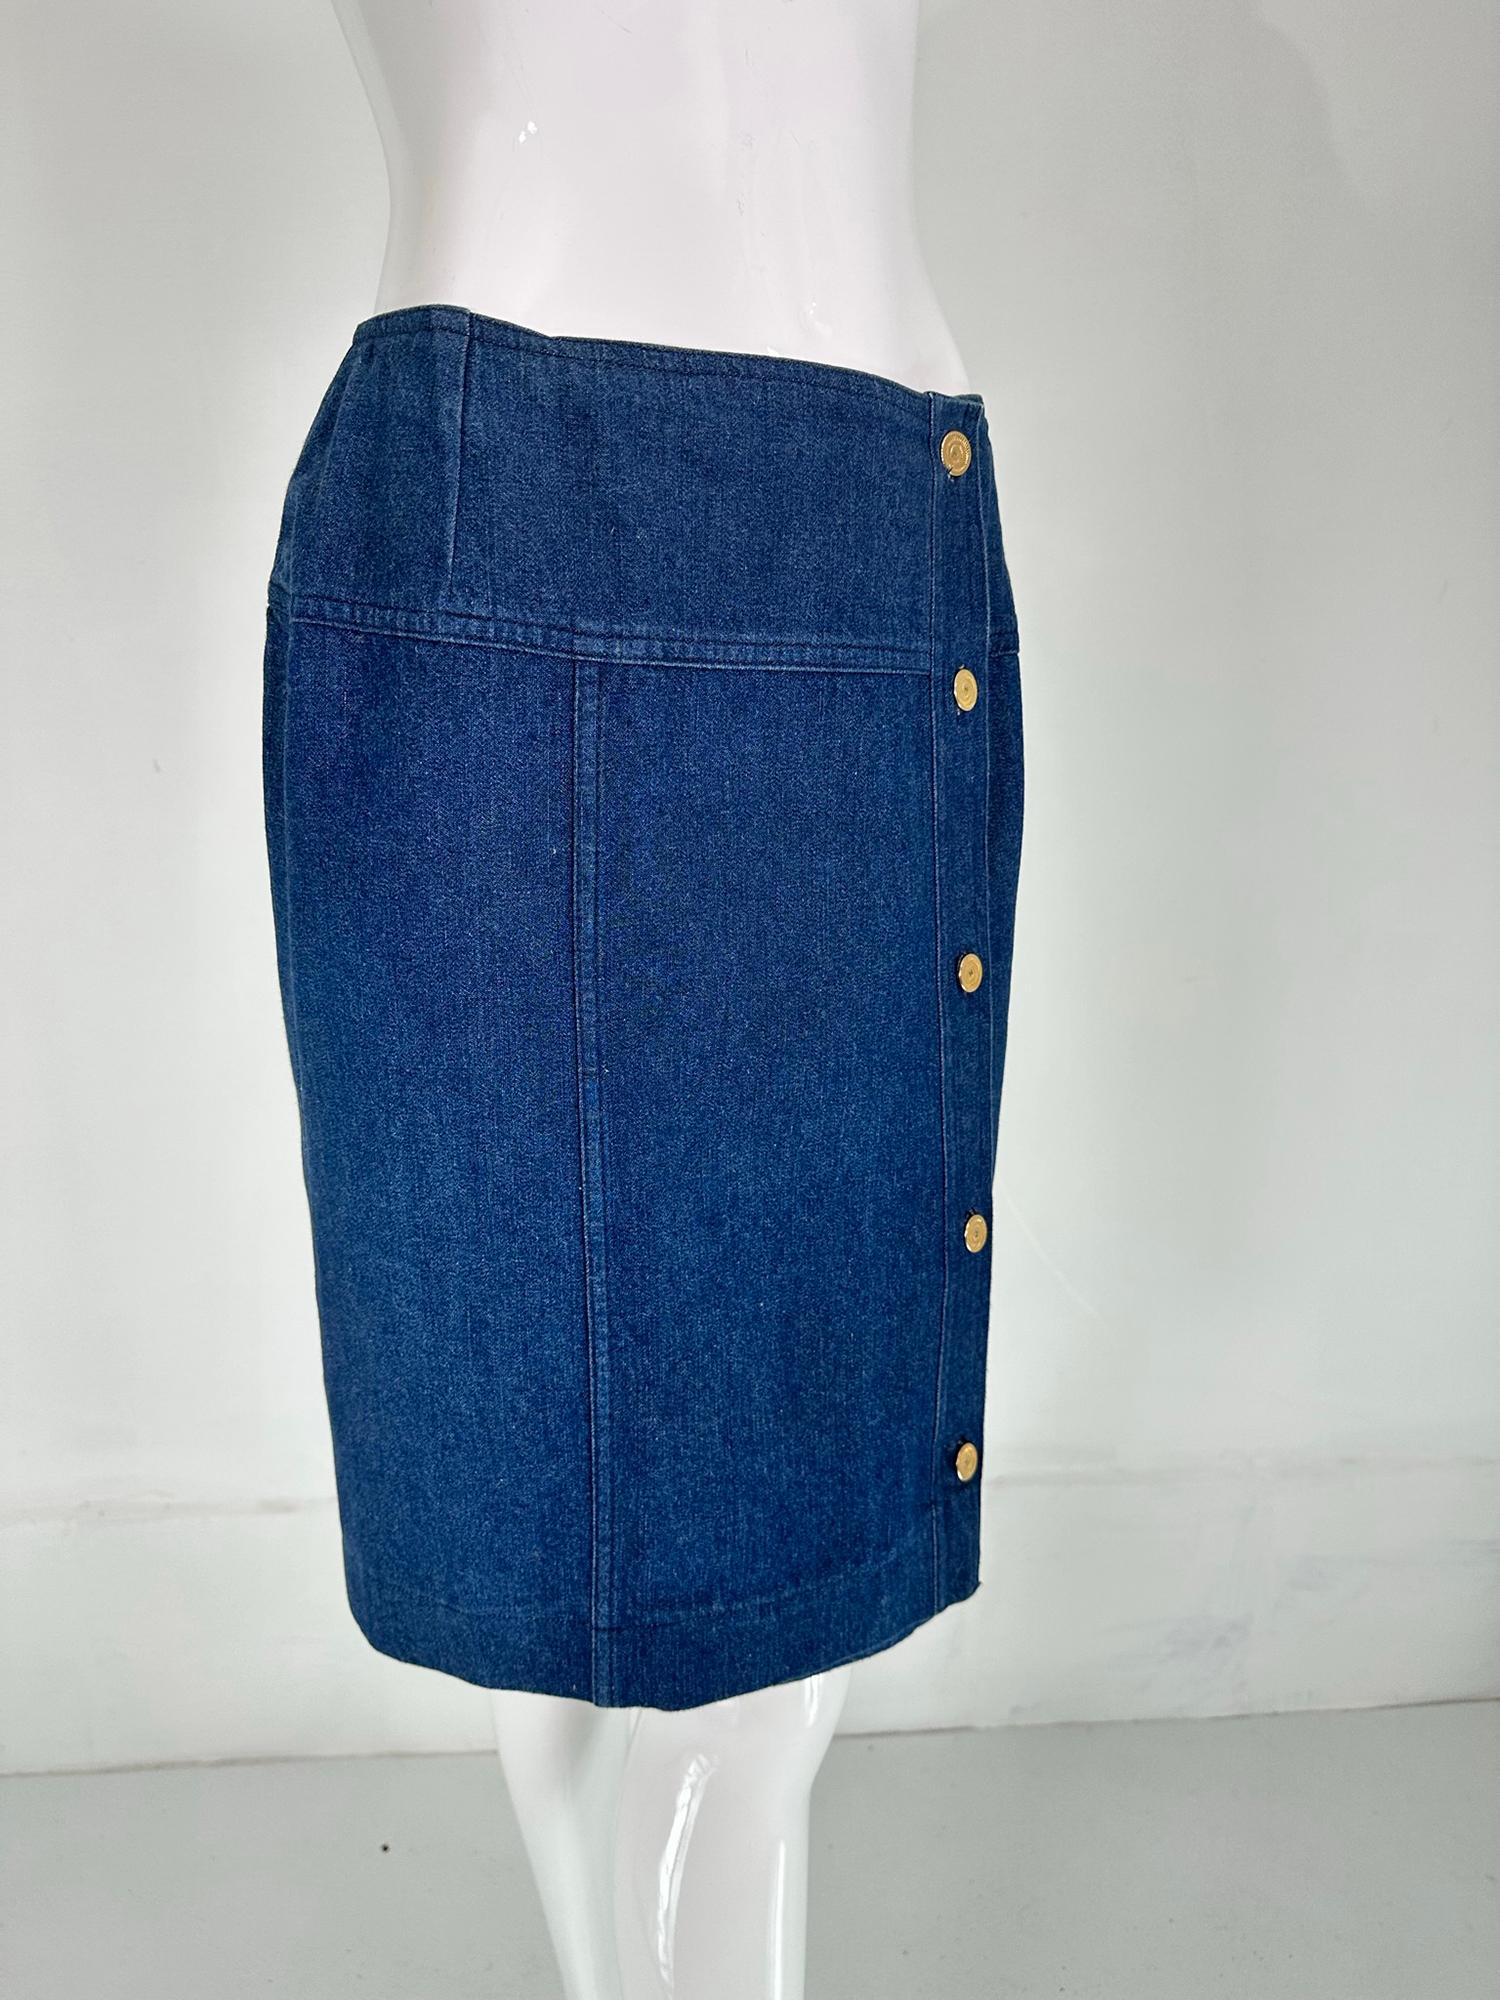 Chanel cotton denim yoke hip, side gold logo button skirt. Wrap skirt closes at the side front with gold Chanel logo buttons, the skirt closes at the waist with hidden hook & eyes at the button side and at the opposite waist side. Unlined. Denim has